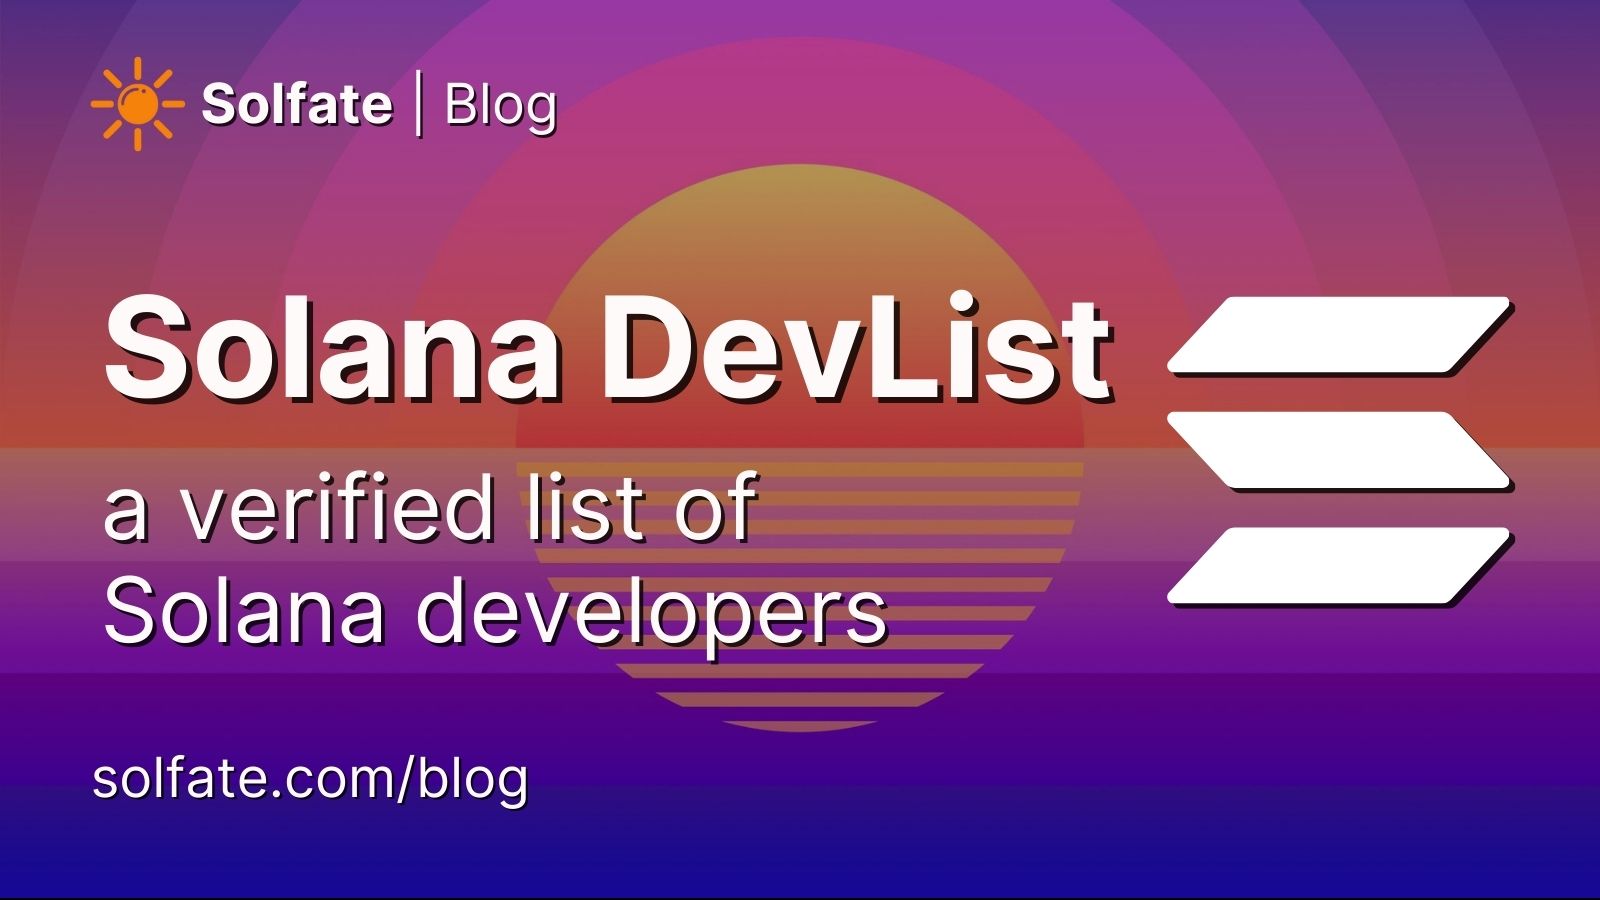 Launch of the Solana DevList: A List of Verified Solana Developers